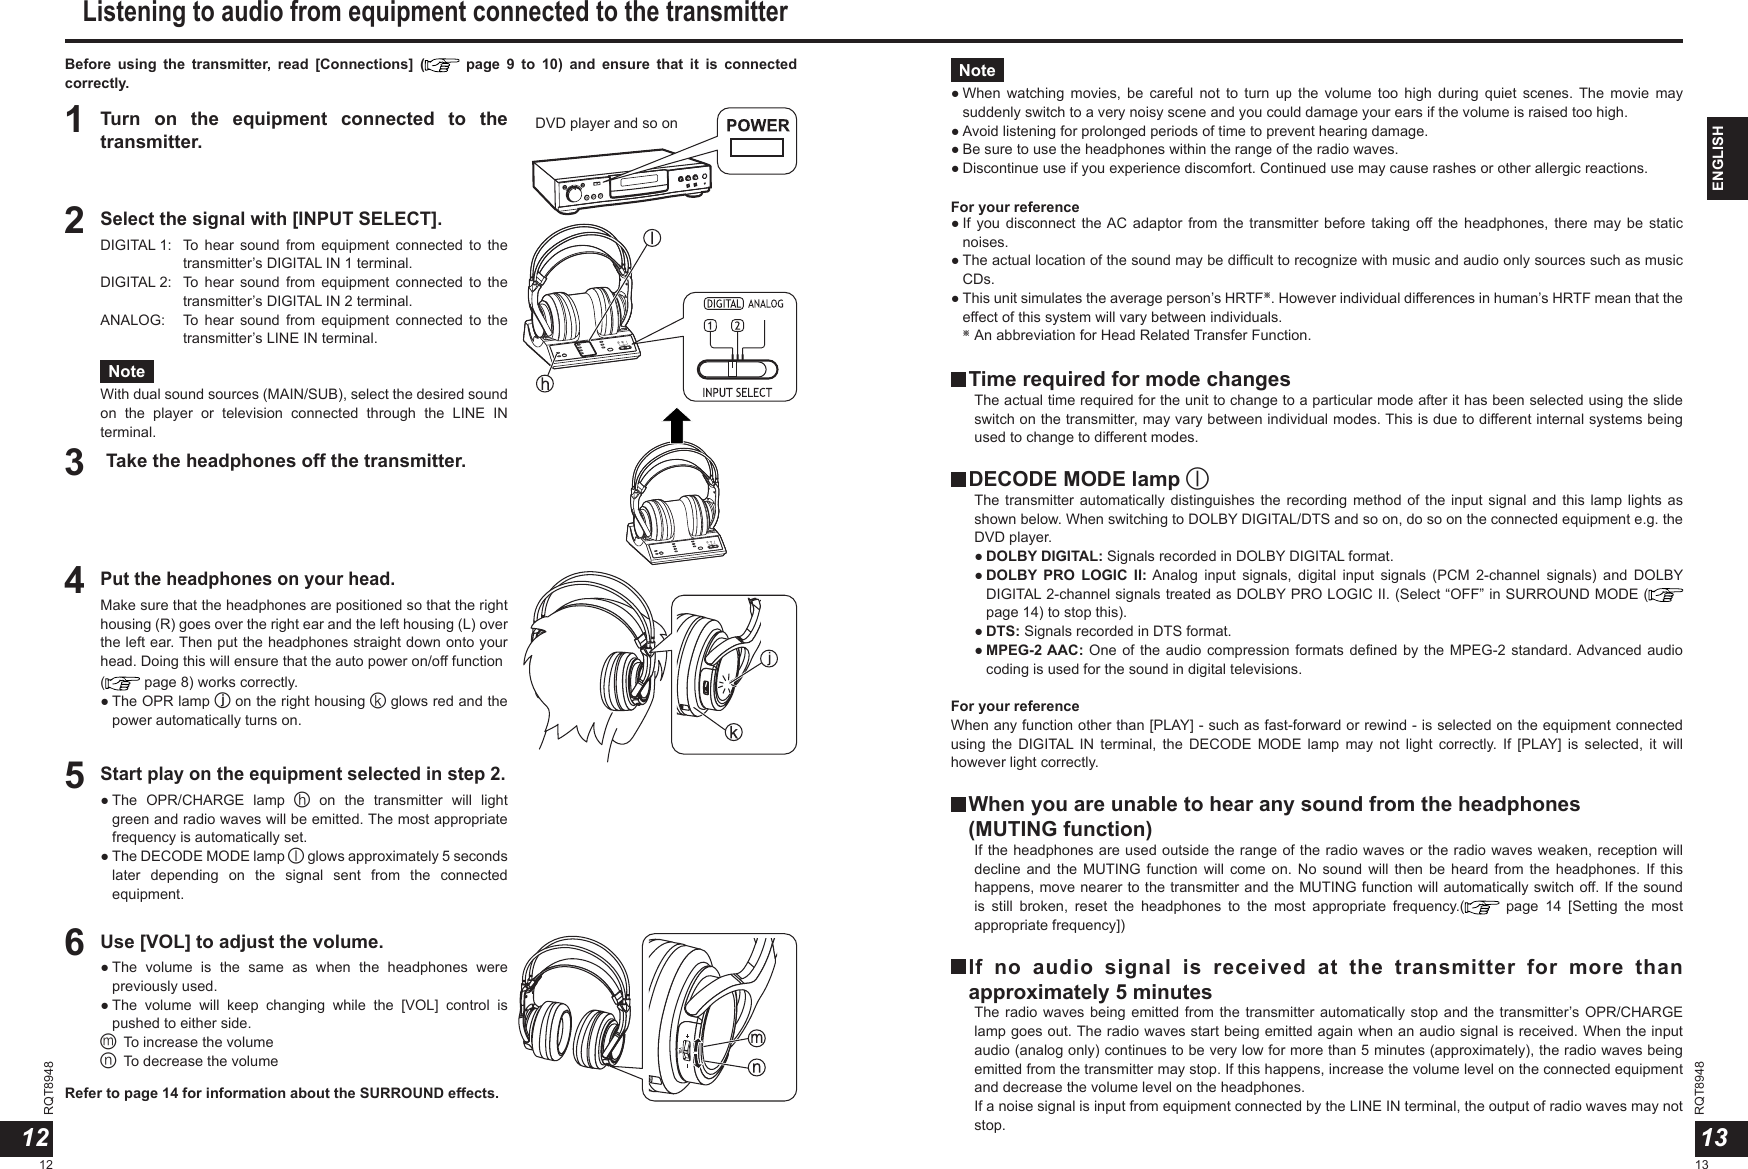 RQT89481213RQT8948ENGLISHBefore  using  the  transmitter,  read  [Connections]  (   page  9  to  10)  and  ensure  that  it  is  connected correctly.1Turn  on  the  equipment  connected  to  the transmitter.3Take the headphones off the transmitter.4Put the headphones on your head.Make sure that the headphones are positioned so that the right housing (R) goes over the right ear and the left housing (L) over the left ear. Then put the headphones straight down onto your head. Doing this will ensure that the auto power on/off function ( page 8) works correctly.●  The OPR lamp j on the right housing k glows red and the power automatically turns on.2Select the signal with [INPUT SELECT].DIGITAL 1:   To  hear  sound  from  equipment  connected  to  the transmitter’s DIGITAL IN 1 terminal.DIGITAL 2:   To  hear  sound  from  equipment  connected  to  the transmitter’s DIGITAL IN 2 terminal.ANALOG:    To  hear  sound  from  equipment  connected  to  the transmitter’s LINE IN terminal.Note●  When  watching  movies,  be  careful  not  to  turn  up  the  volume  too  high  during  quiet  scenes. The  movie  may suddenly switch to a very noisy scene and you could damage your ears if the volume is raised too high.● Avoid listening for prolonged periods of time to prevent hearing damage.● Be sure to use the headphones within the range of the radio waves.●  Discontinue use if you experience discomfort. Continued use may cause rashes or other allergic reactions.NoteWith dual sound sources (MAIN/SUB), select the desired sound on  the  player  or  television  connected  through  the  LINE  IN terminal.  Time required for mode changes     The actual time required for the unit to change to a particular mode after it has been selected using the slide switch on the transmitter, may vary between individual modes. This is due to different internal systems being used to change to different modes.  DECODE MODE lamp l     The transmitter automatically distinguishes the recording  method of the input signal and  this lamp lights as shown below. When switching to DOLBY DIGITAL/DTS and so on, do so on the connected equipment e.g. the DVD player.    ● DOLBY DIGITAL: Signals recorded in DOLBY DIGITAL format.    ●  DOLBY PRO  LOGIC  II: Analog  input  signals,  digital  input  signals  (PCM  2-channel  signals)  and  DOLBY DIGITAL 2-channel signals treated as DOLBY PRO LOGIC II. (Select “OFF” in SURROUND MODE (  page 14) to stop this).    ● DTS: Signals recorded in DTS format.    ●  MPEG-2 AAC: One of the audio compression formats deﬁned by the MPEG-2 standard. Advanced audio coding is used for the sound in digital televisions.For your referenceWhen any function other than [PLAY] - such as fast-forward or rewind - is selected on the equipment connected using  the  DIGITAL IN  terminal,  the  DECODE  MODE  lamp  may  not  light  correctly.  If  [PLAY]  is  selected,  it  will however light correctly.  When you are unable to hear any sound from the headphones  (MUTING function)      If the headphones are used outside the range of the radio waves or the radio waves weaken, reception will decline and  the  MUTING function  will  come on.  No sound  will  then be  heard  from the  headphones.  If  this happens, move nearer to the transmitter and the MUTING function will automatically switch off. If the sound is  still  broken,  reset  the  headphones  to  the  most  appropriate  frequency.(   page  14  [Setting  the  most appropriate frequency])  If  no  audio  signal  is  received  at  the  transmitter  for  more  than approximately 5 minutes     The radio waves being emitted from the transmitter automatically stop and the transmitter’s OPR/CHARGE lamp goes out. The radio waves start being emitted again when an audio signal is received. When the input audio (analog only) continues to be very low for more than 5 minutes (approximately), the radio waves being emitted from the transmitter may stop. If this happens, increase the volume level on the connected equipment and decrease the volume level on the headphones.     If a noise signal is input from equipment connected by the LINE IN terminal, the output of radio waves may not stop.5Start play on the equipment selected in step 2.●  The  OPR/CHARGE  lamp  h  on  the  transmitter  will  light green and radio waves will be emitted. The most appropriate frequency is automatically set.●  The DECODE MODE lamp l glows approximately 5 seconds later  depending  on  the  signal  sent  from  the  connected equipment.6Use [VOL] to adjust the volume.●  The  volume  is  the  same  as  when  the  headphones  were previously used.●  The  volume  will  keep  changing  while  the  [VOL]  control  is pushed to either side.m To increase the volumen To decrease the volumeListening to audio from equipment connected to the transmitterDVD player and so on●  If you  disconnect  the AC  adaptor from  the transmitter before  taking off the  headphones, there  may be  static noises.●  The actual location of the sound may be difﬁcult to recognize with music and audio only sources such as music CDs.●  This unit simulates the average person’s HRTF※. However individual differences in human’s HRTF mean that the effect of this system will vary between individuals.  ※ An abbreviation for Head Related Transfer Function.1312For your referenceRefer to page 14 for information about the SURROUND effects.